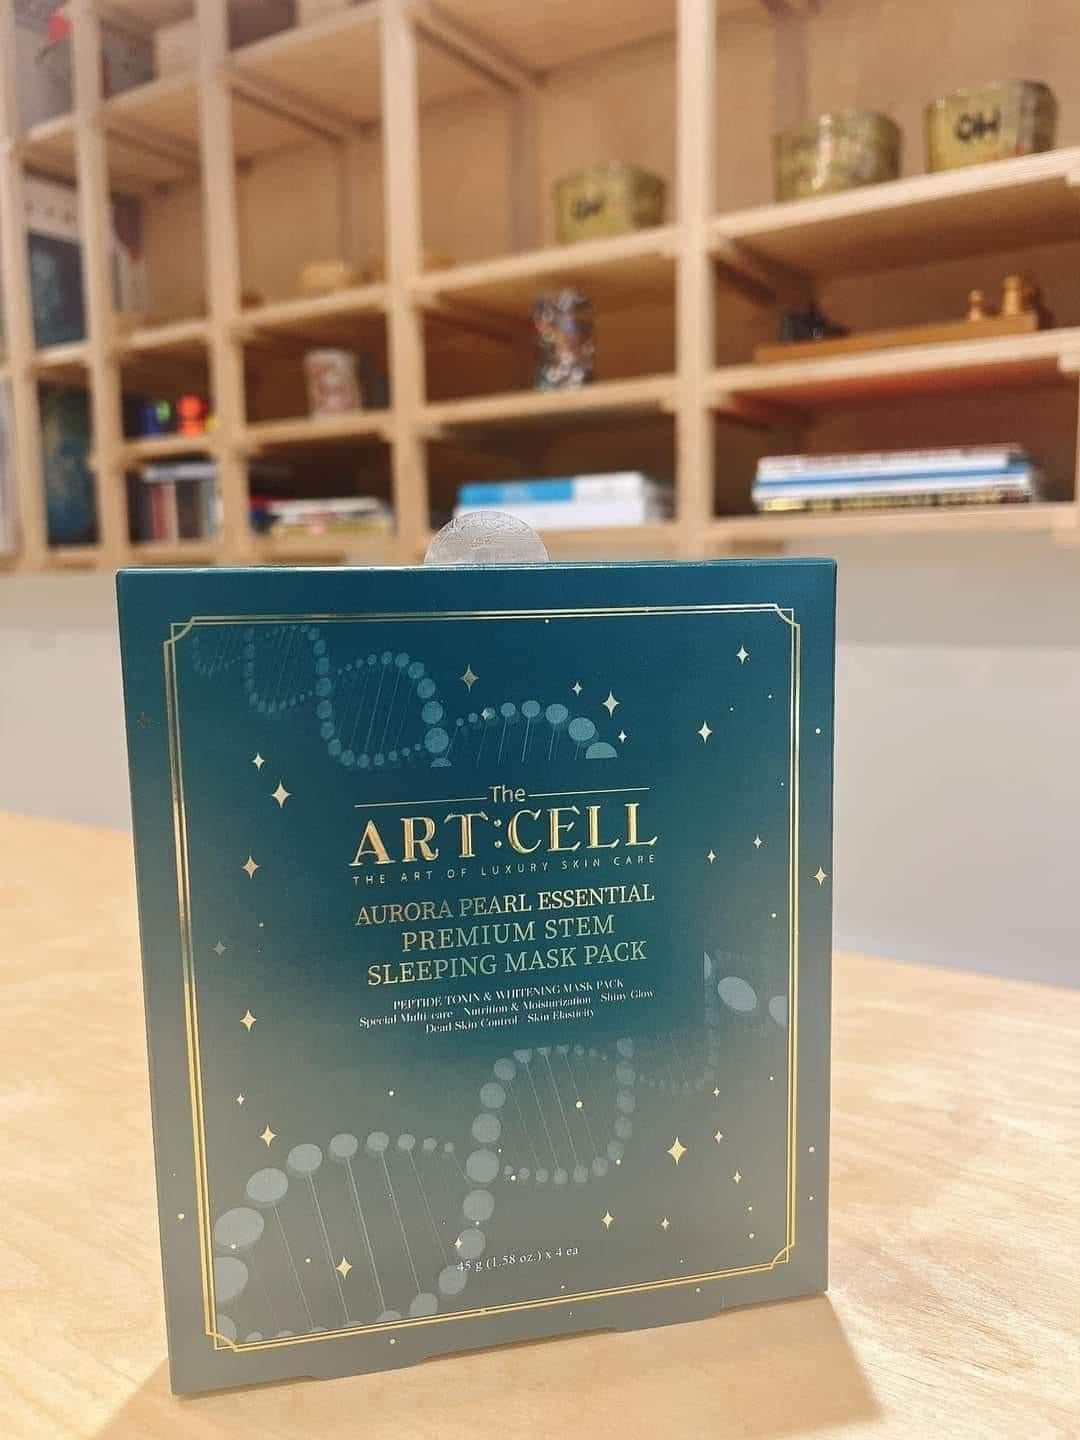 Mat na thạch the Artcell